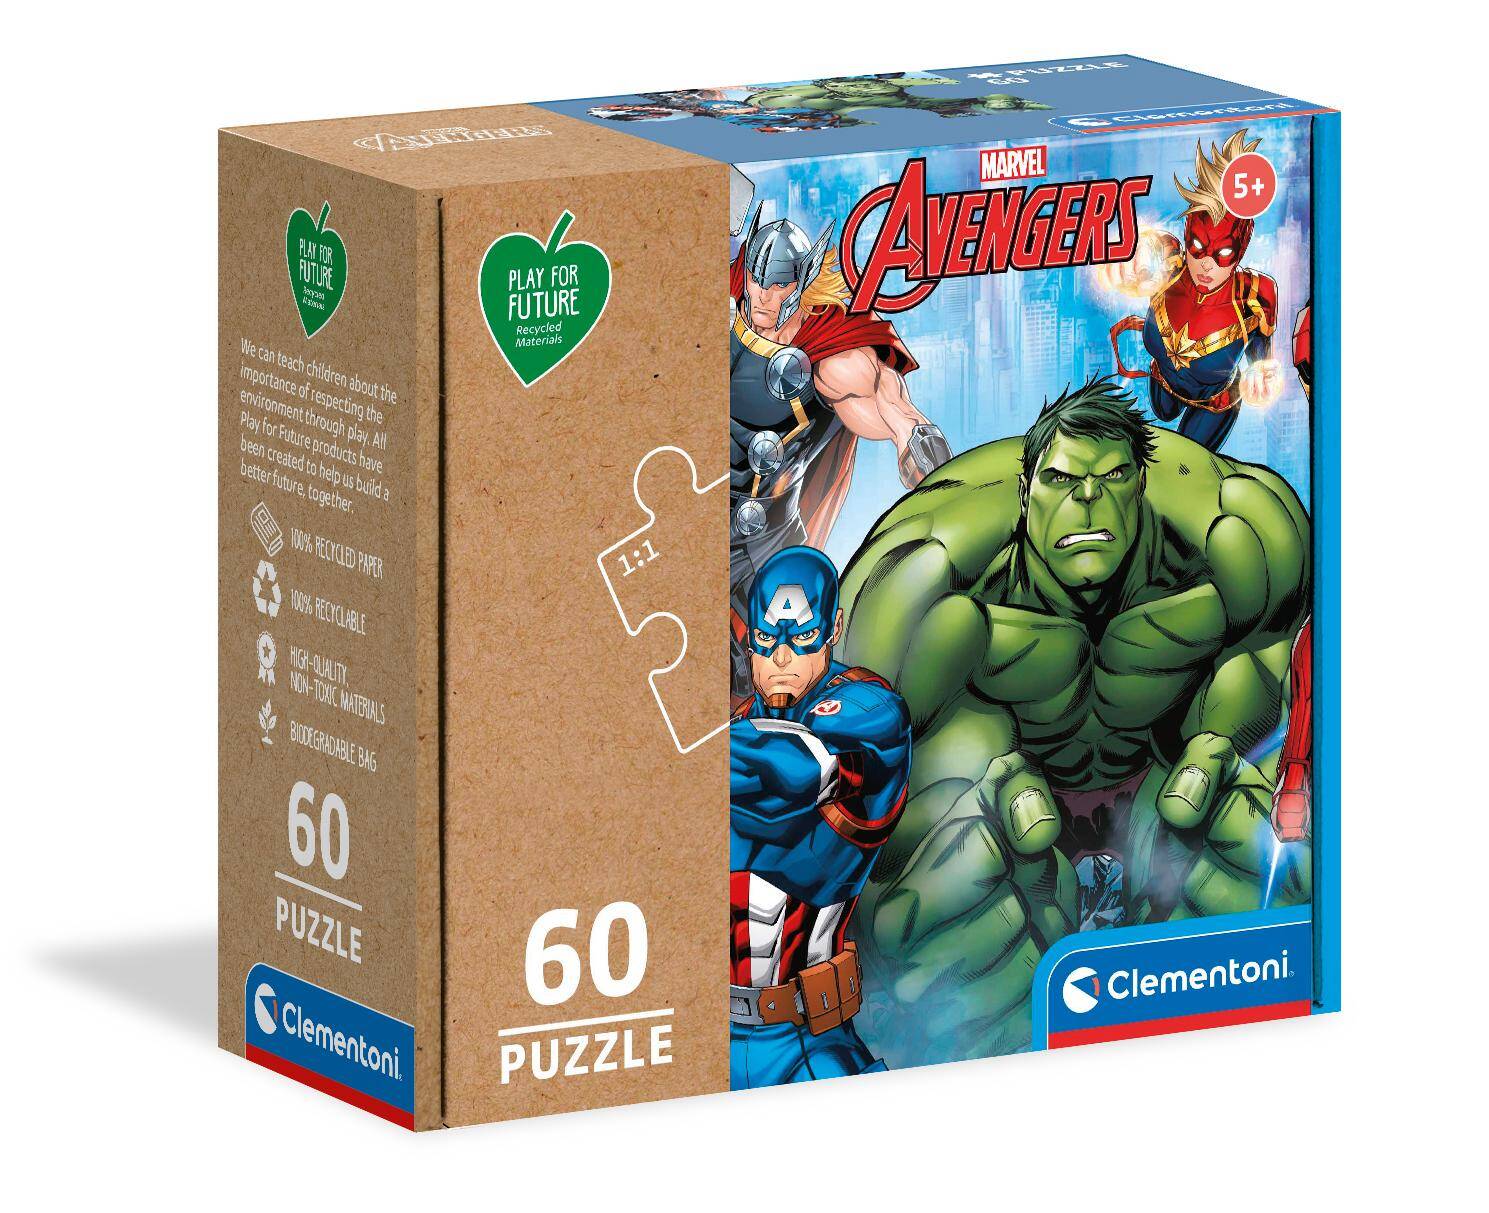 Puzzle 60 play for future Avengers 26101